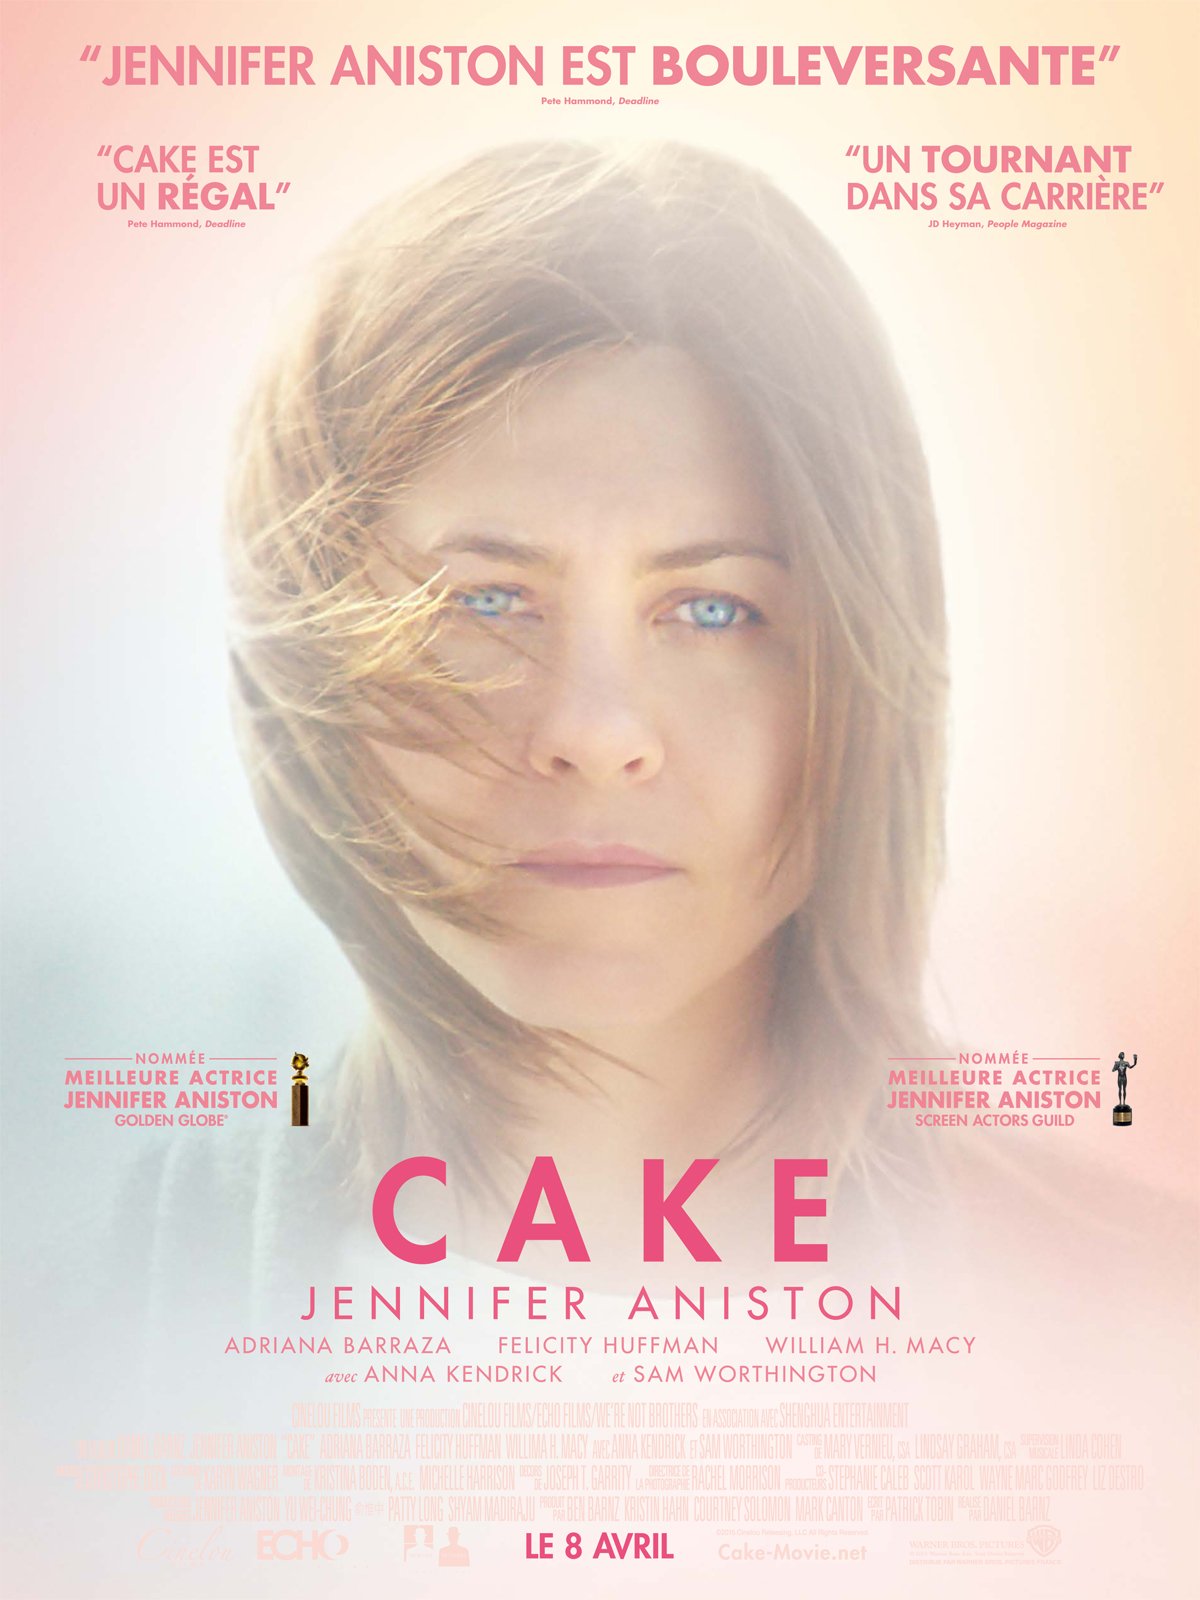 Jennifer Aniston Interview - 'Cake' Star Finds Her 'Dream Role